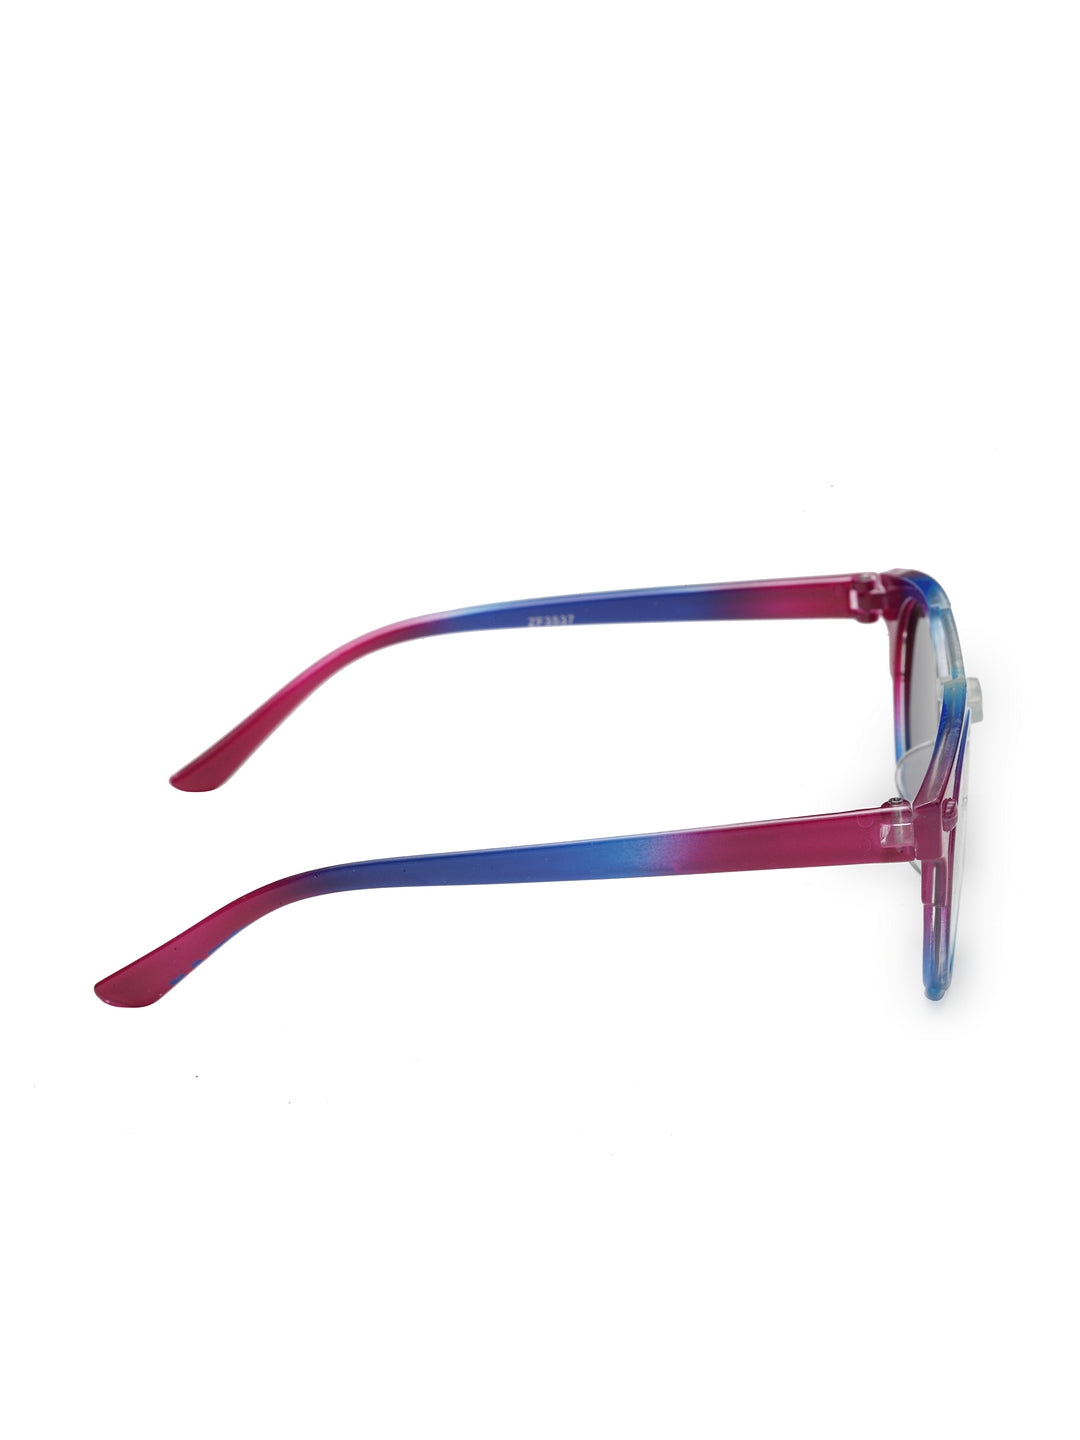 Stol'n  Sunglasses For Kids ( UV Protected) White and Red